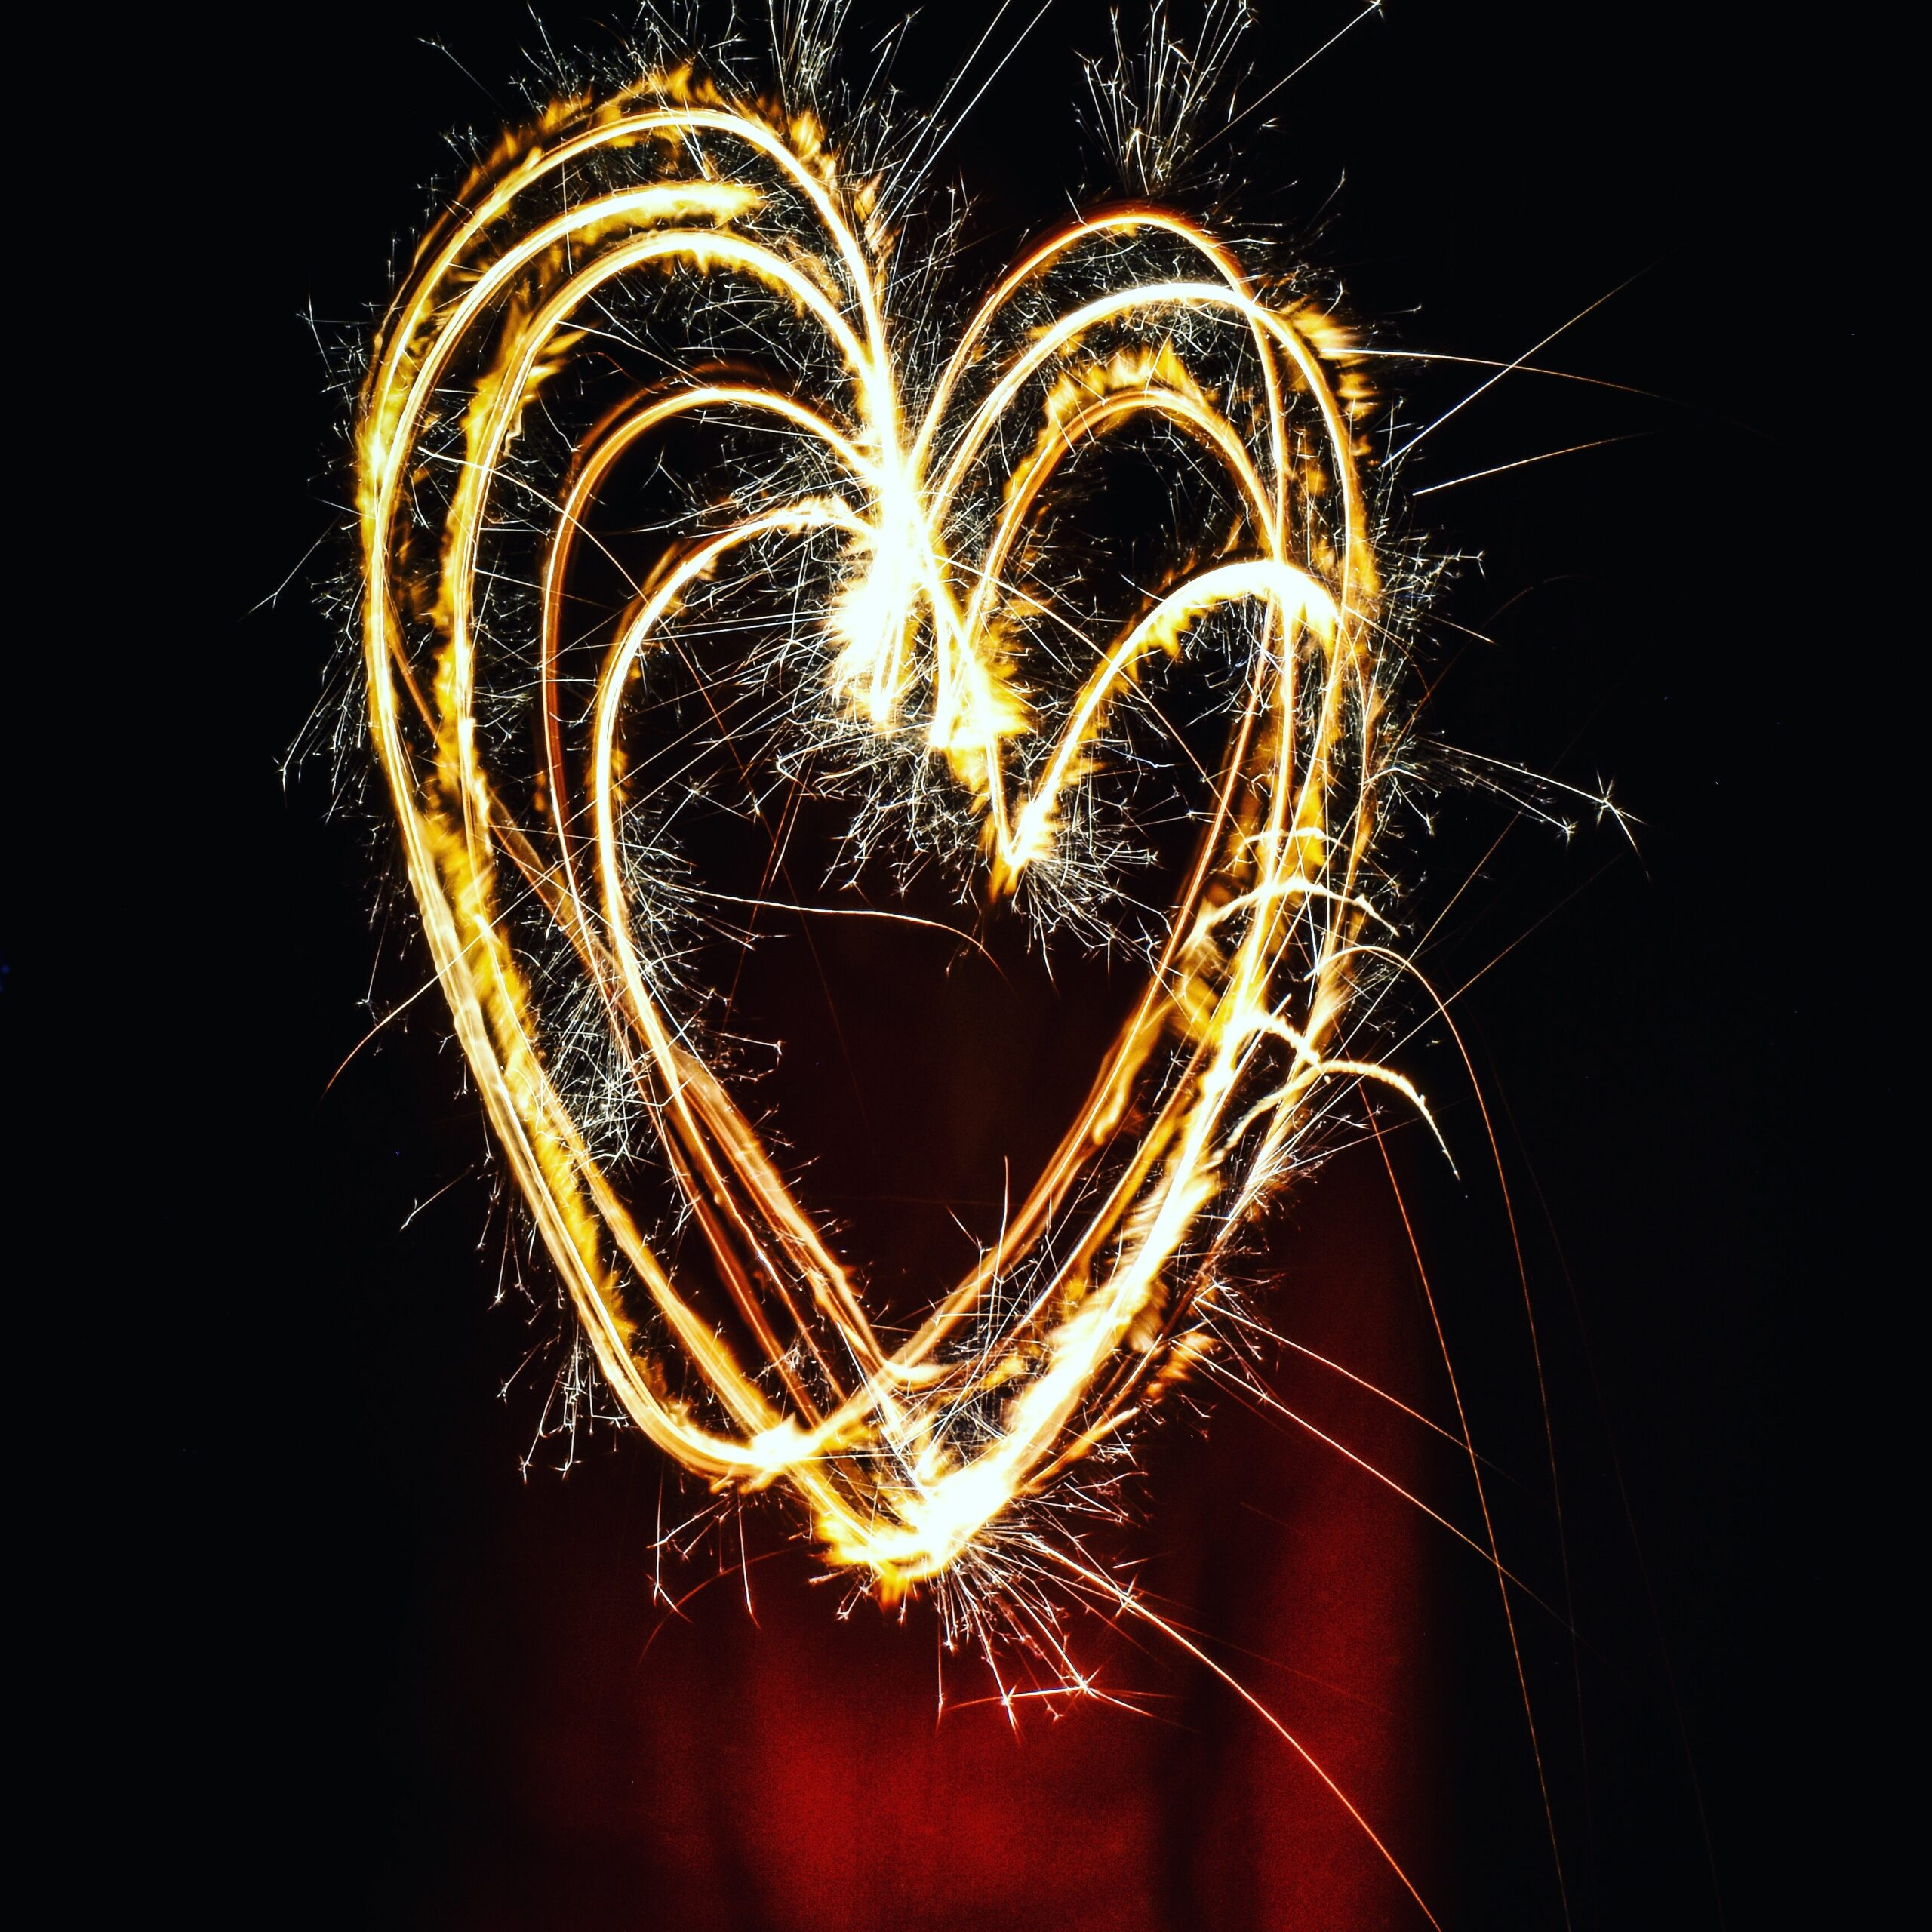 A heart shape is drawn using bright, glowing sparklers against a dark background. The light trails are vibrant and dynamic, creating a warm and lively atmosphere.